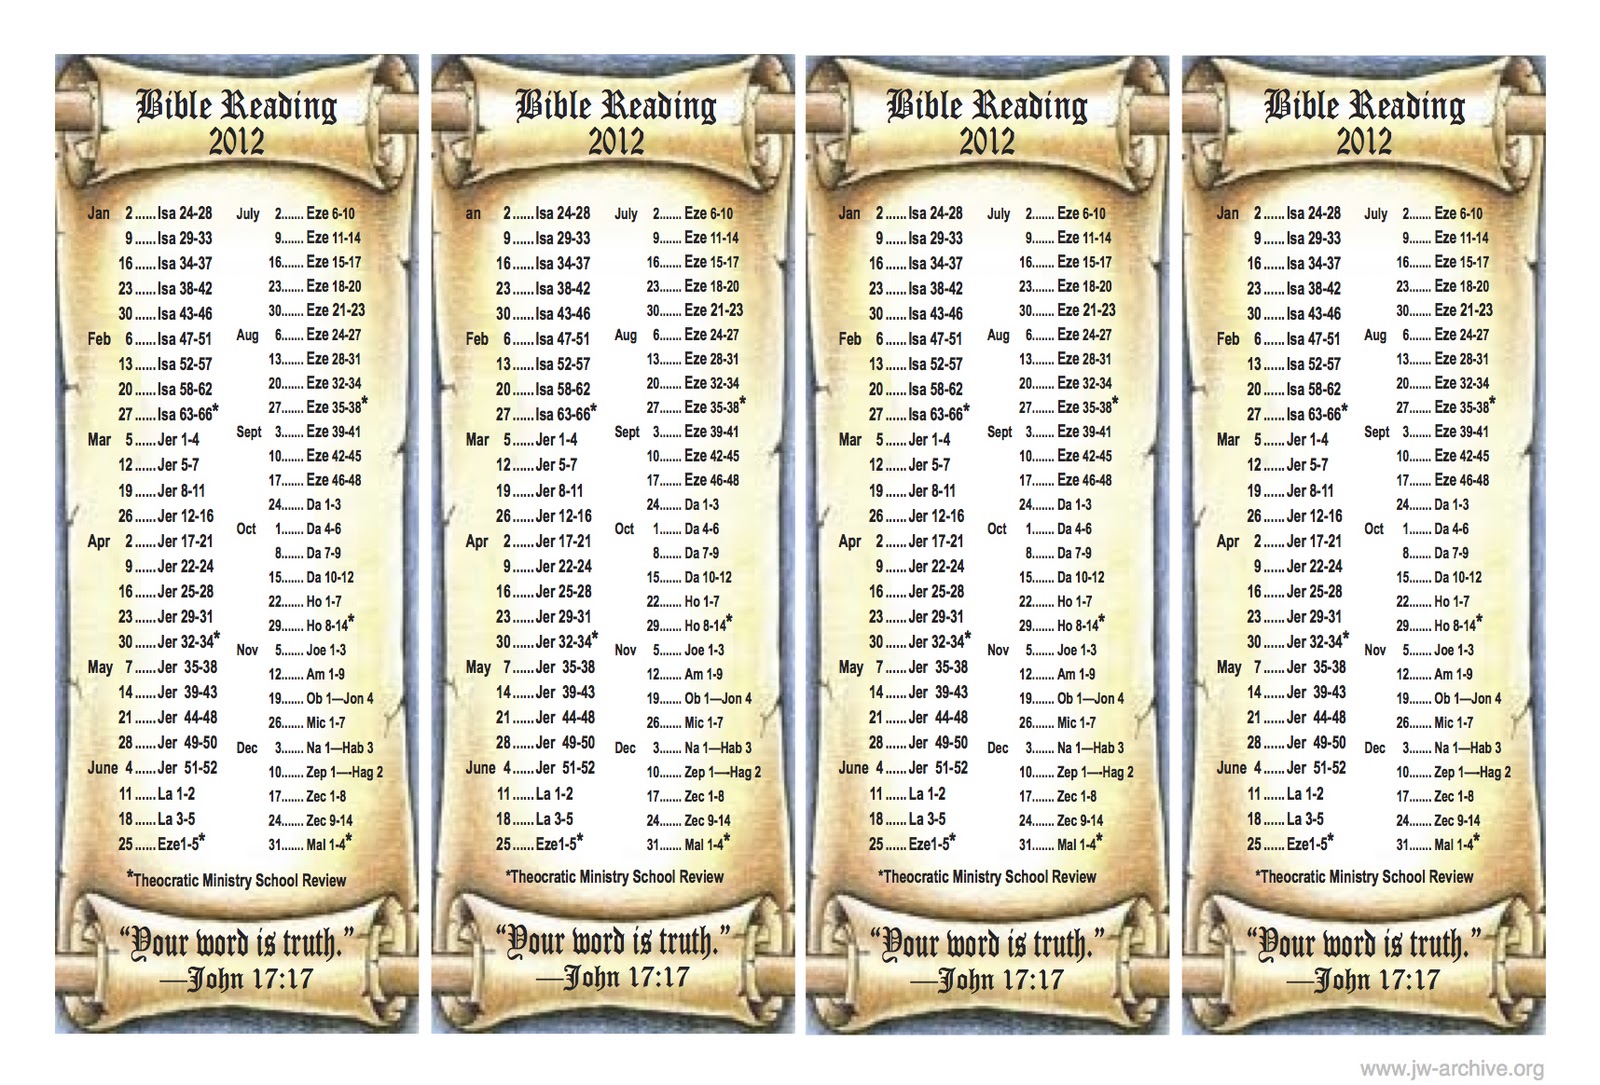 jw-archive.org: 2012 Bible Reading Bookmark